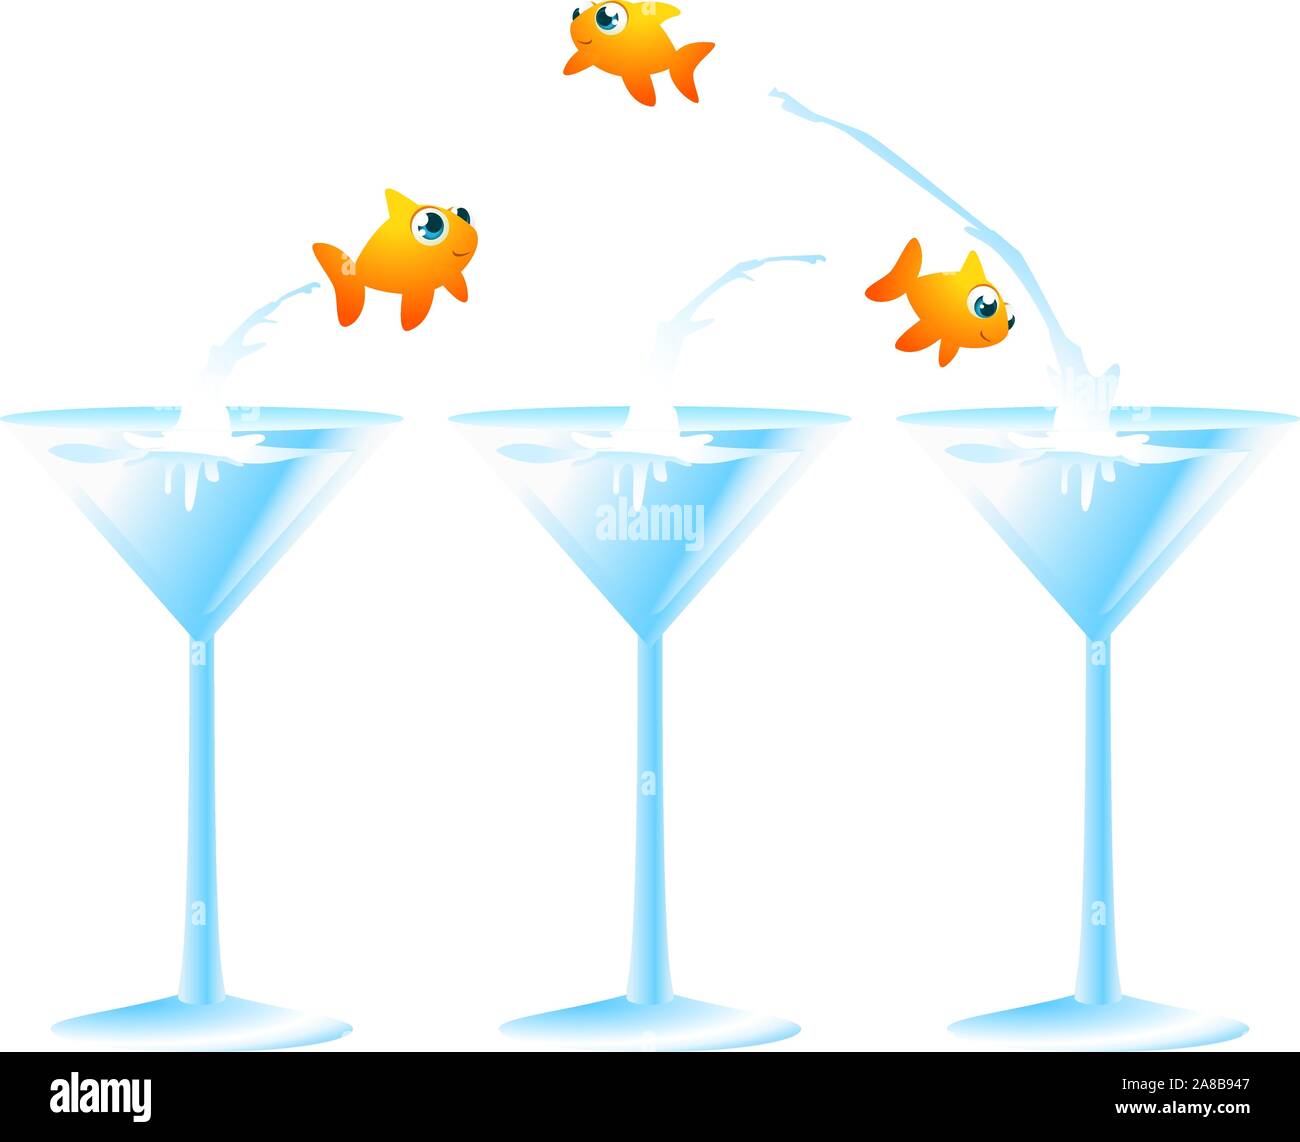 Little goldish fish jumping from a cocktail glass to another f, leaving in the first one two fish friends. Vector illustration. Stock Vector